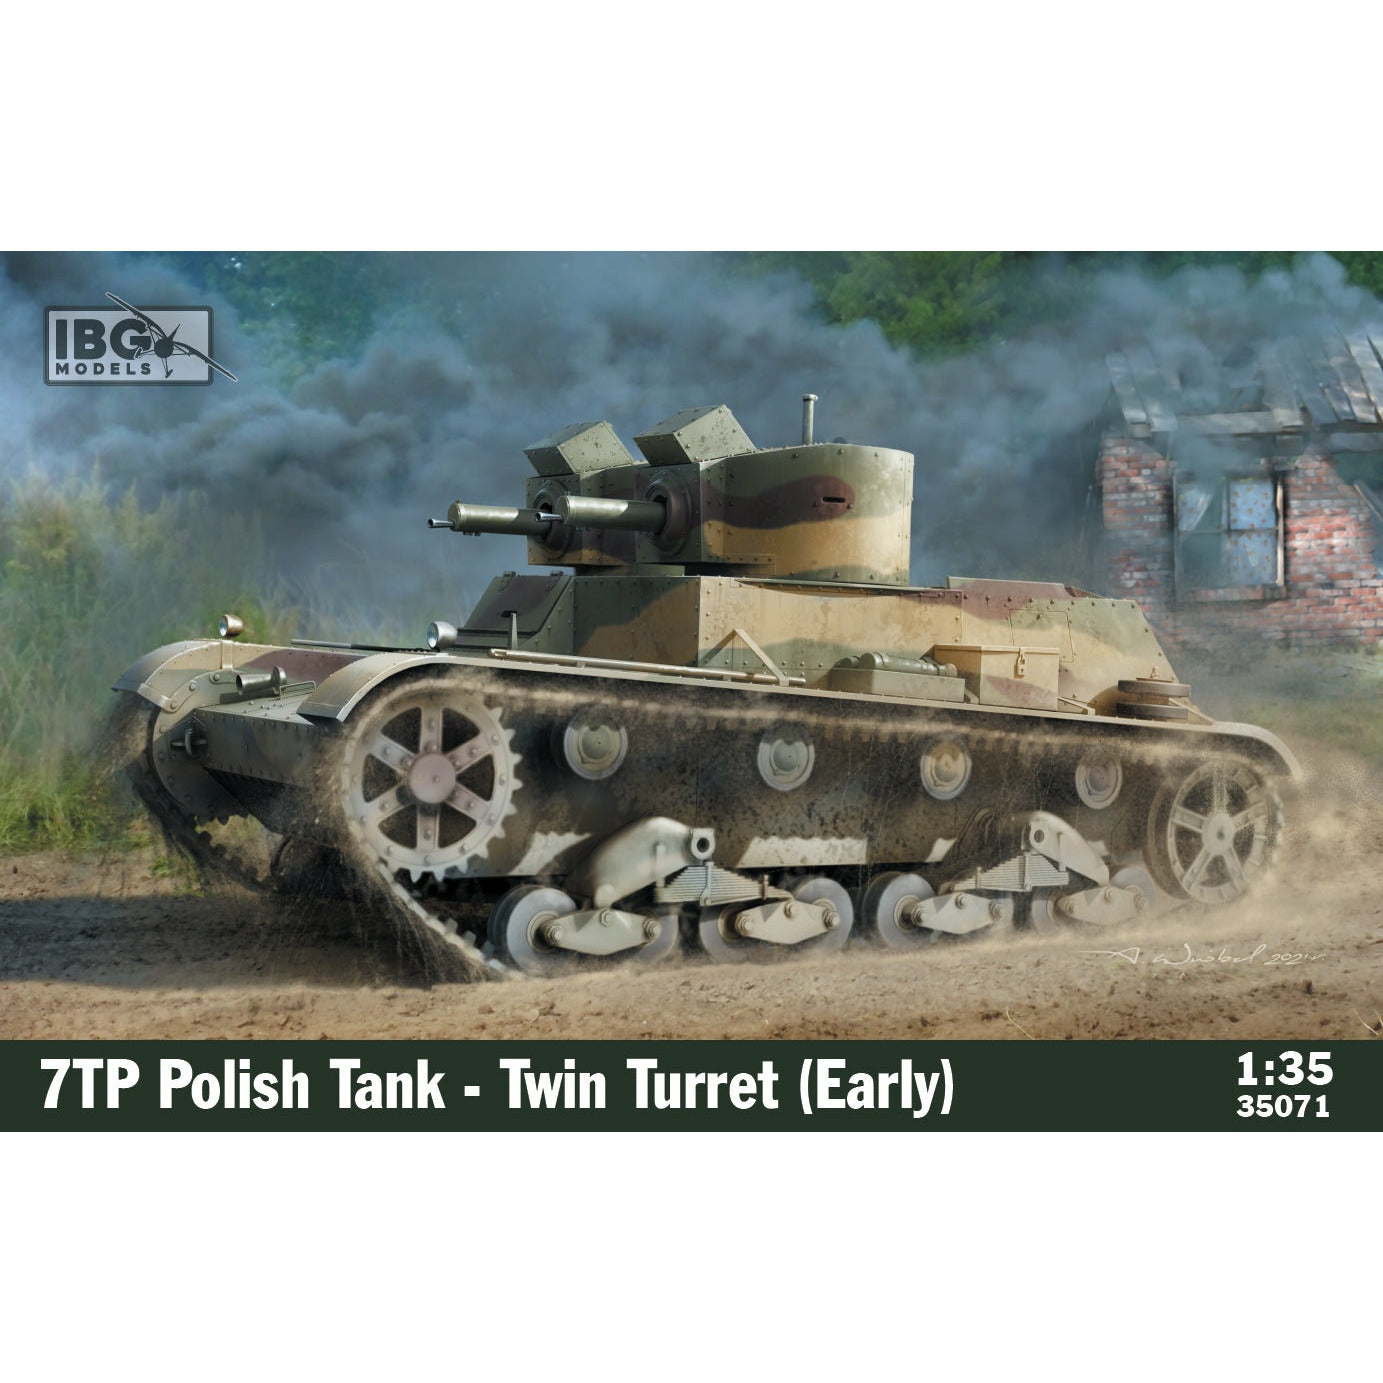 7TP Polish Tank Twin Turret (Early) 1/35 #35071 by IBG Models